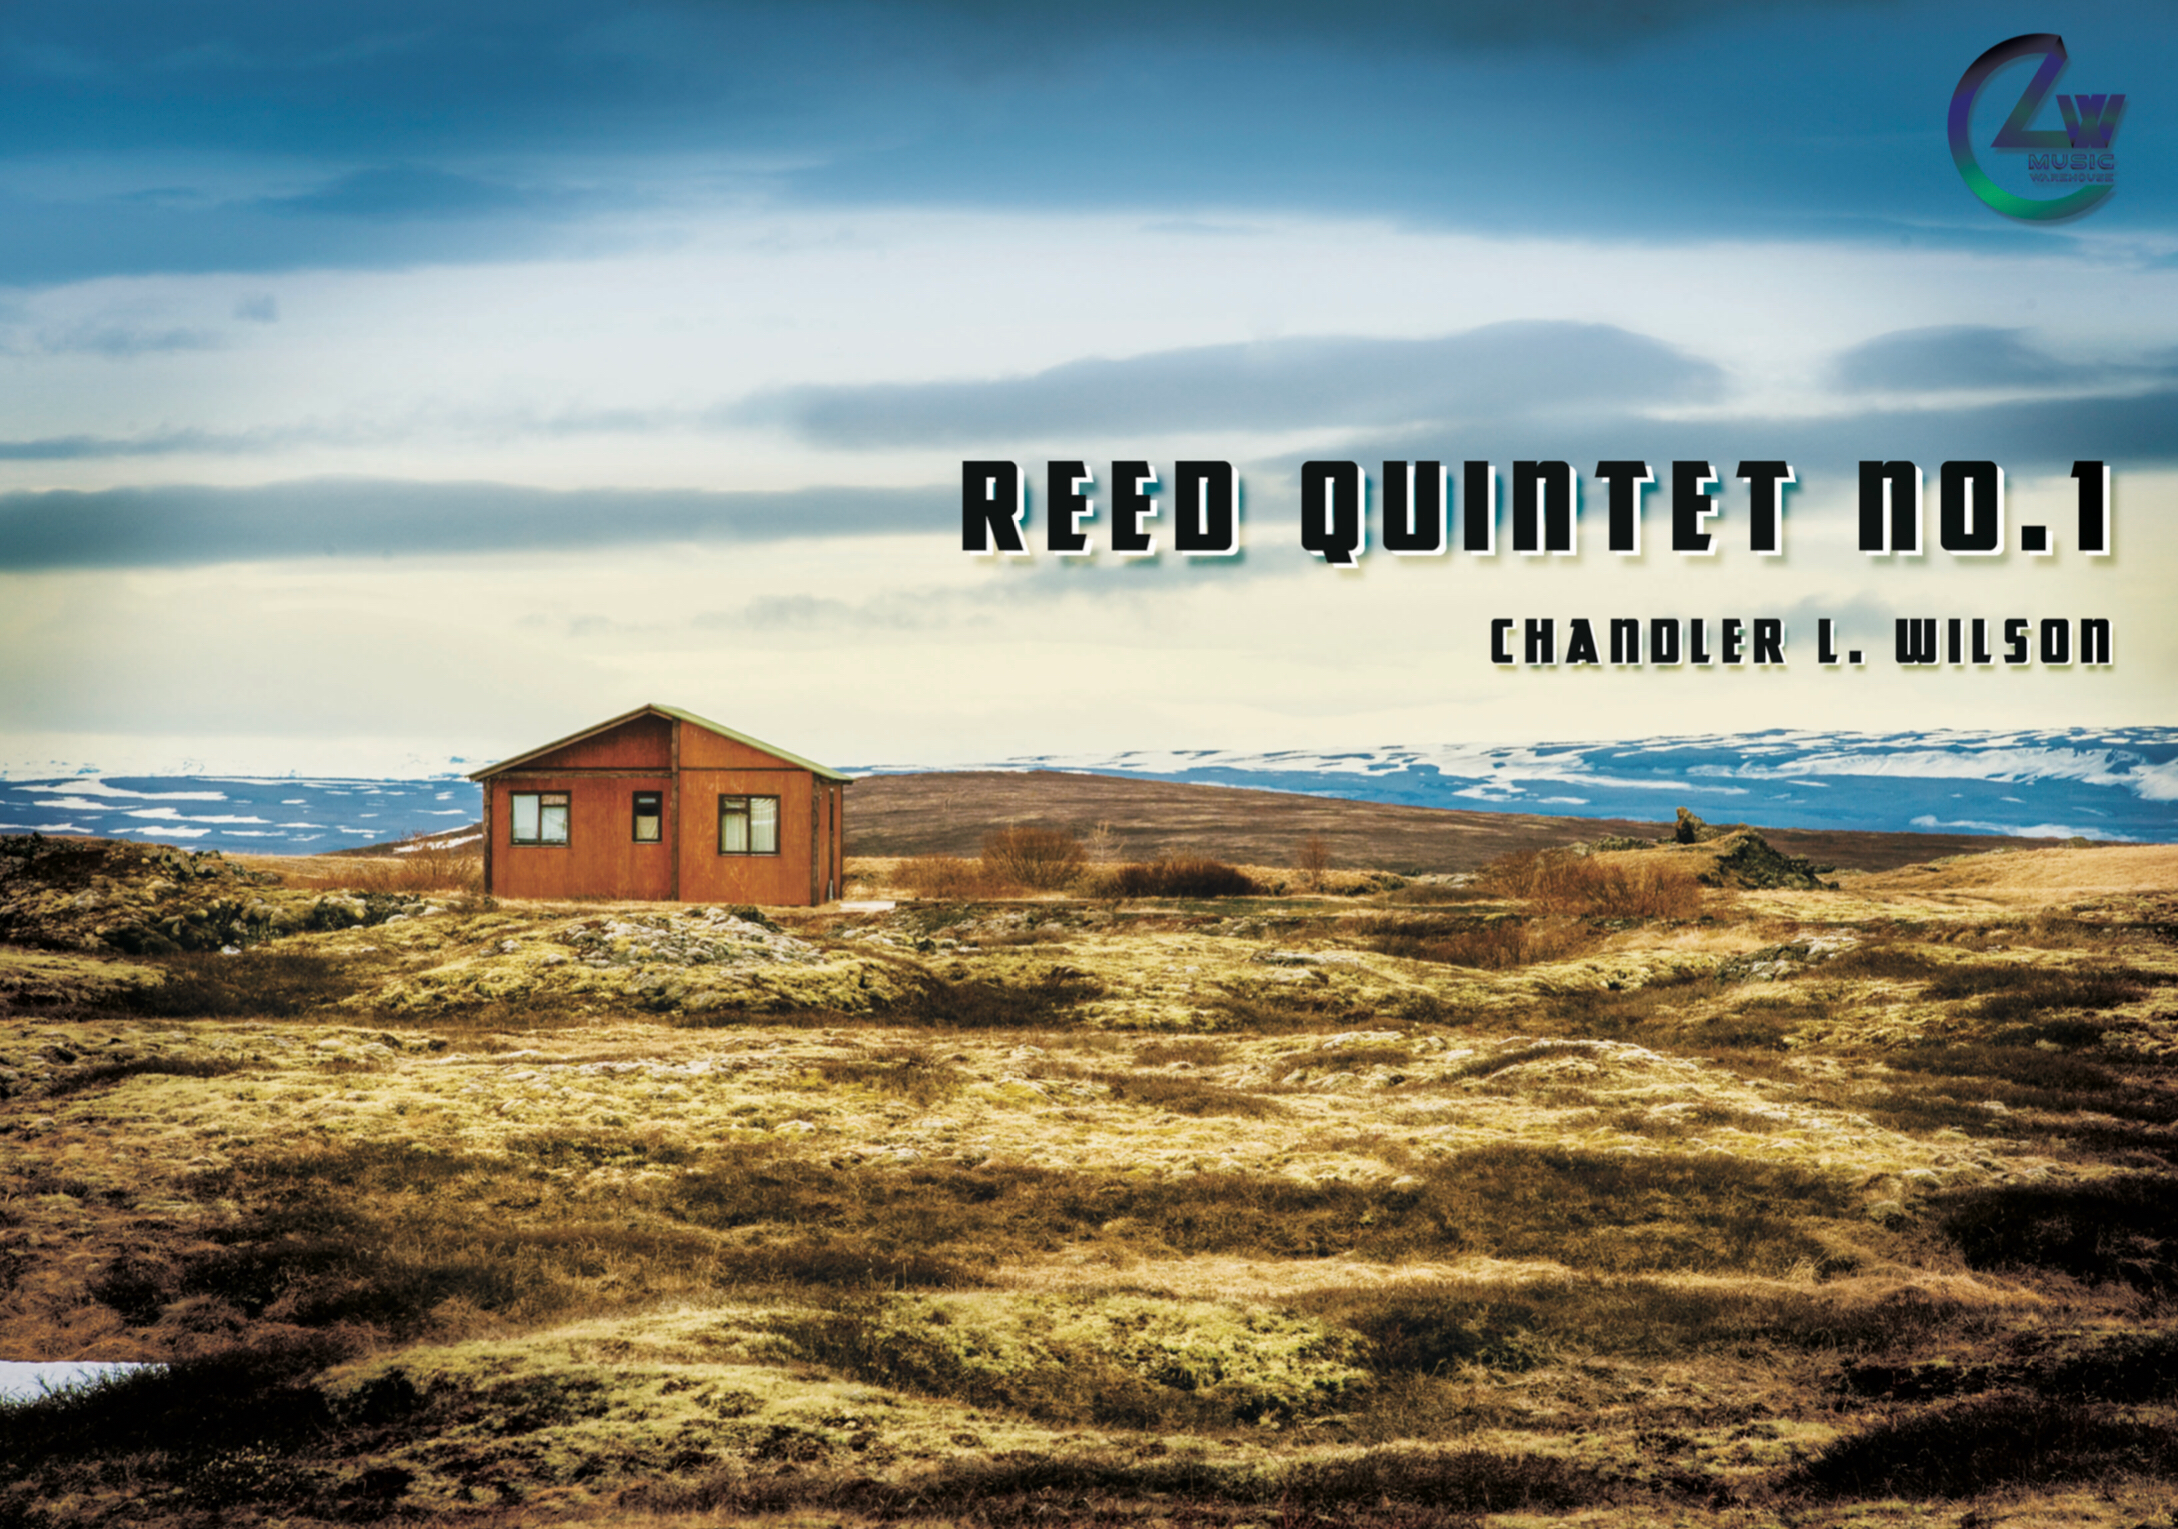 Reed Quintet No.1 by Chandler L. Wilson